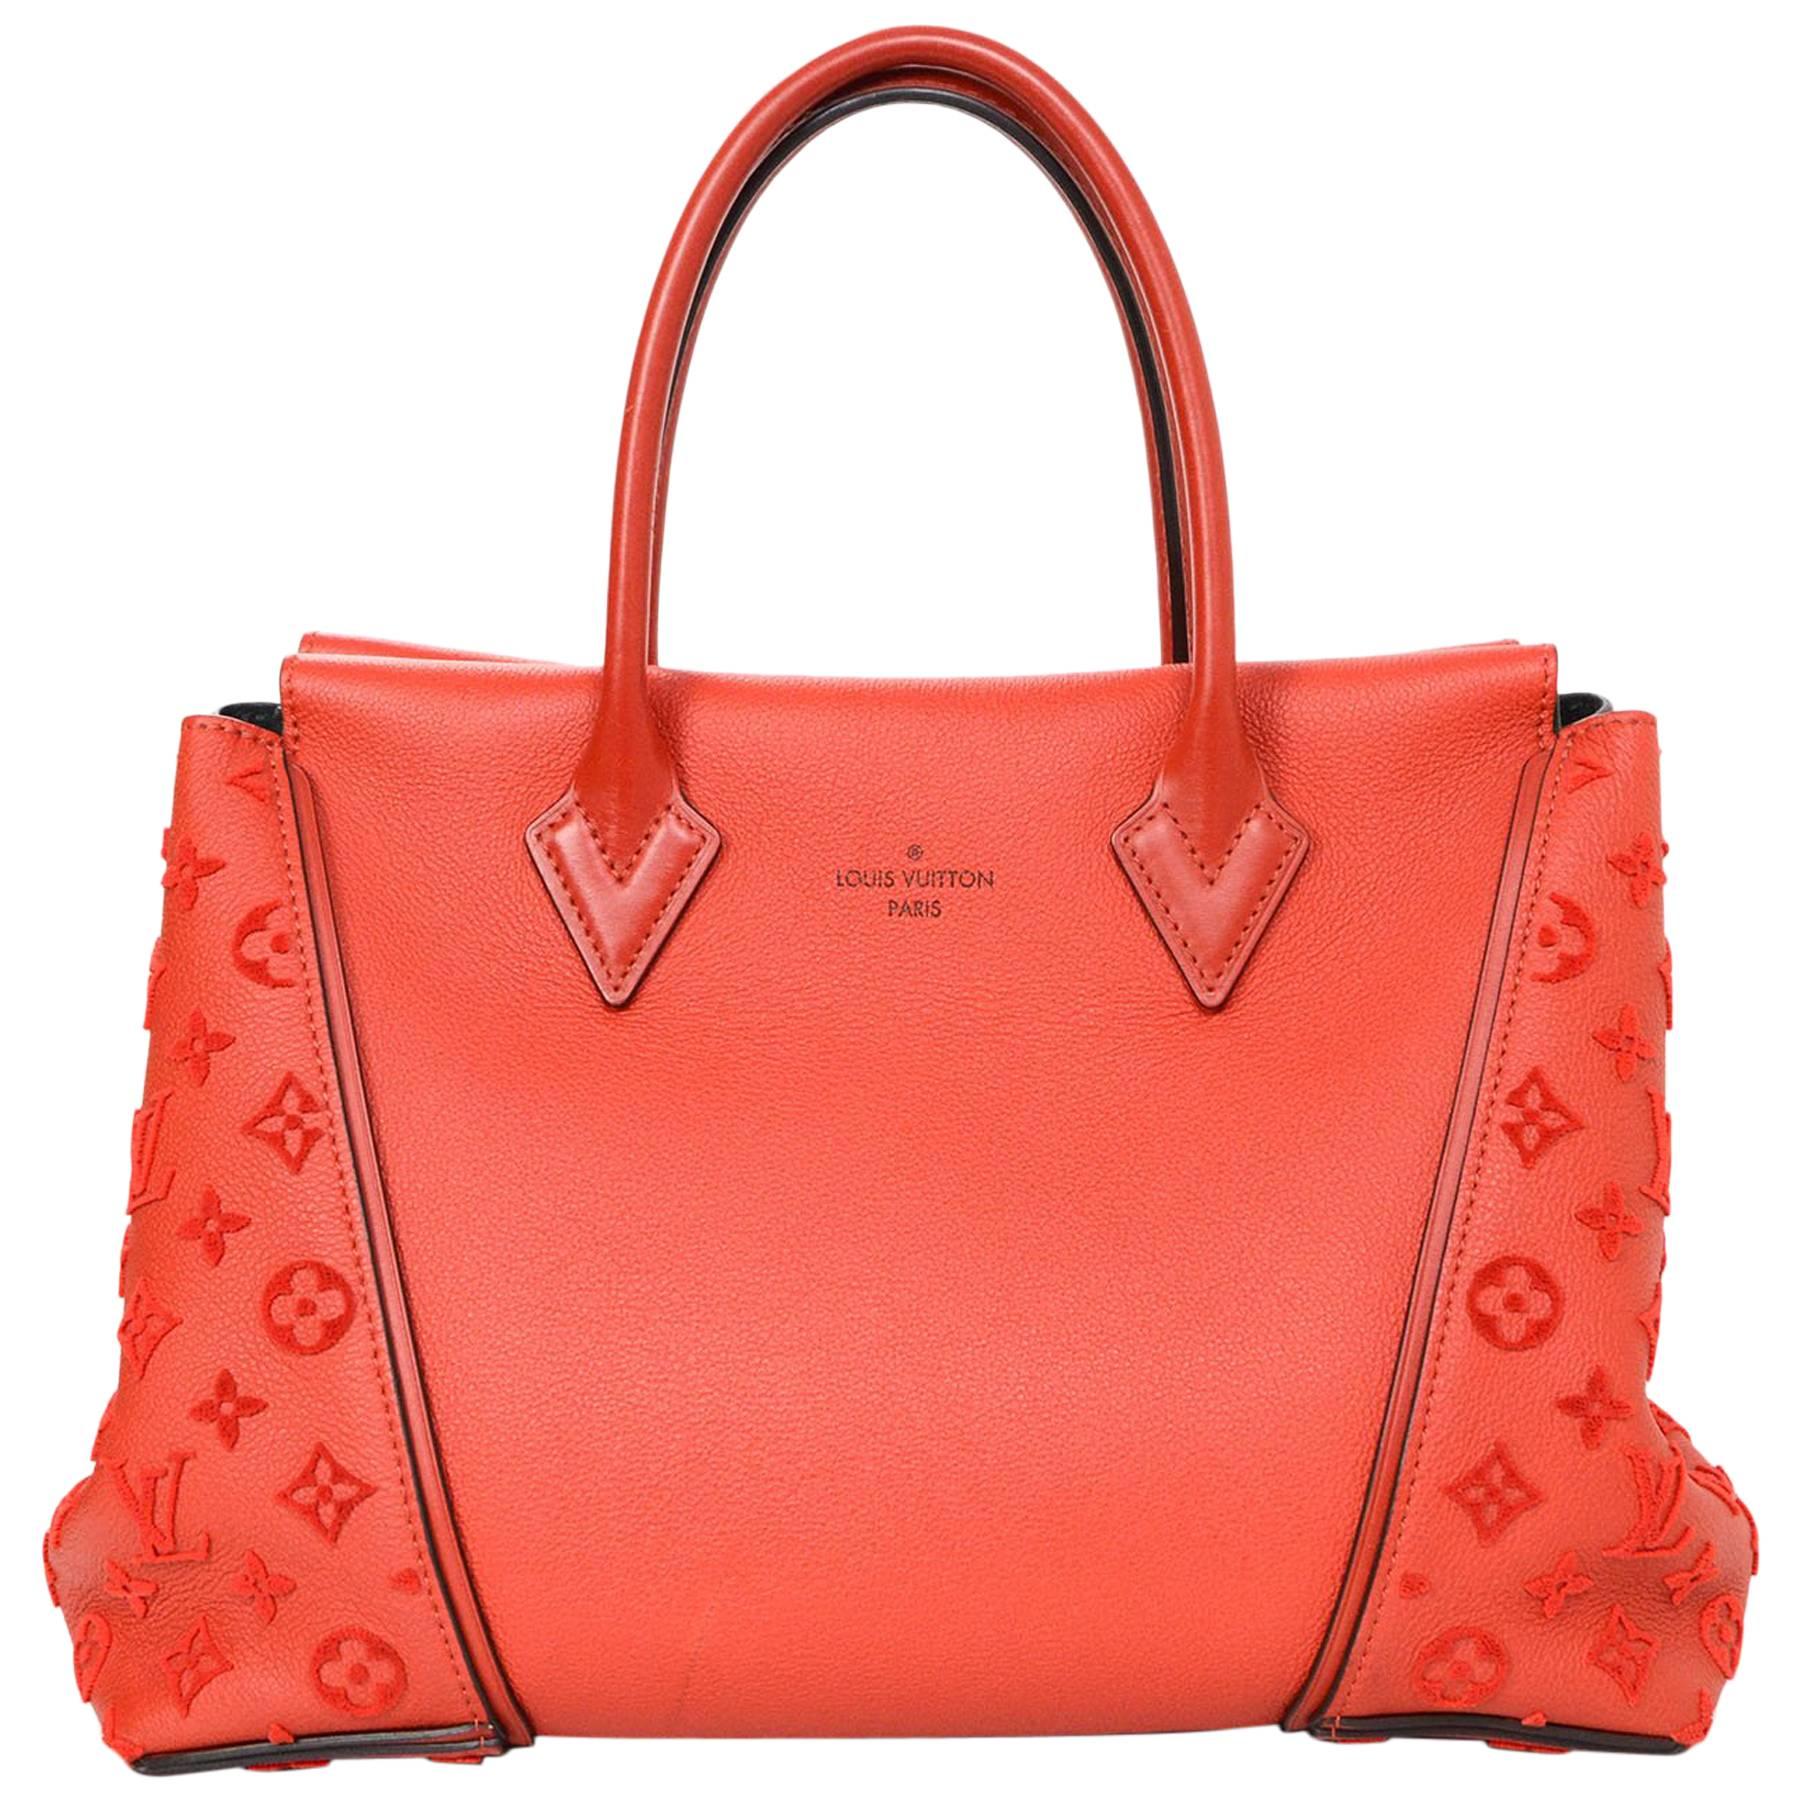 Louis Vuitton Red Leather Velours W PM Tote Bag rt. $4, 850